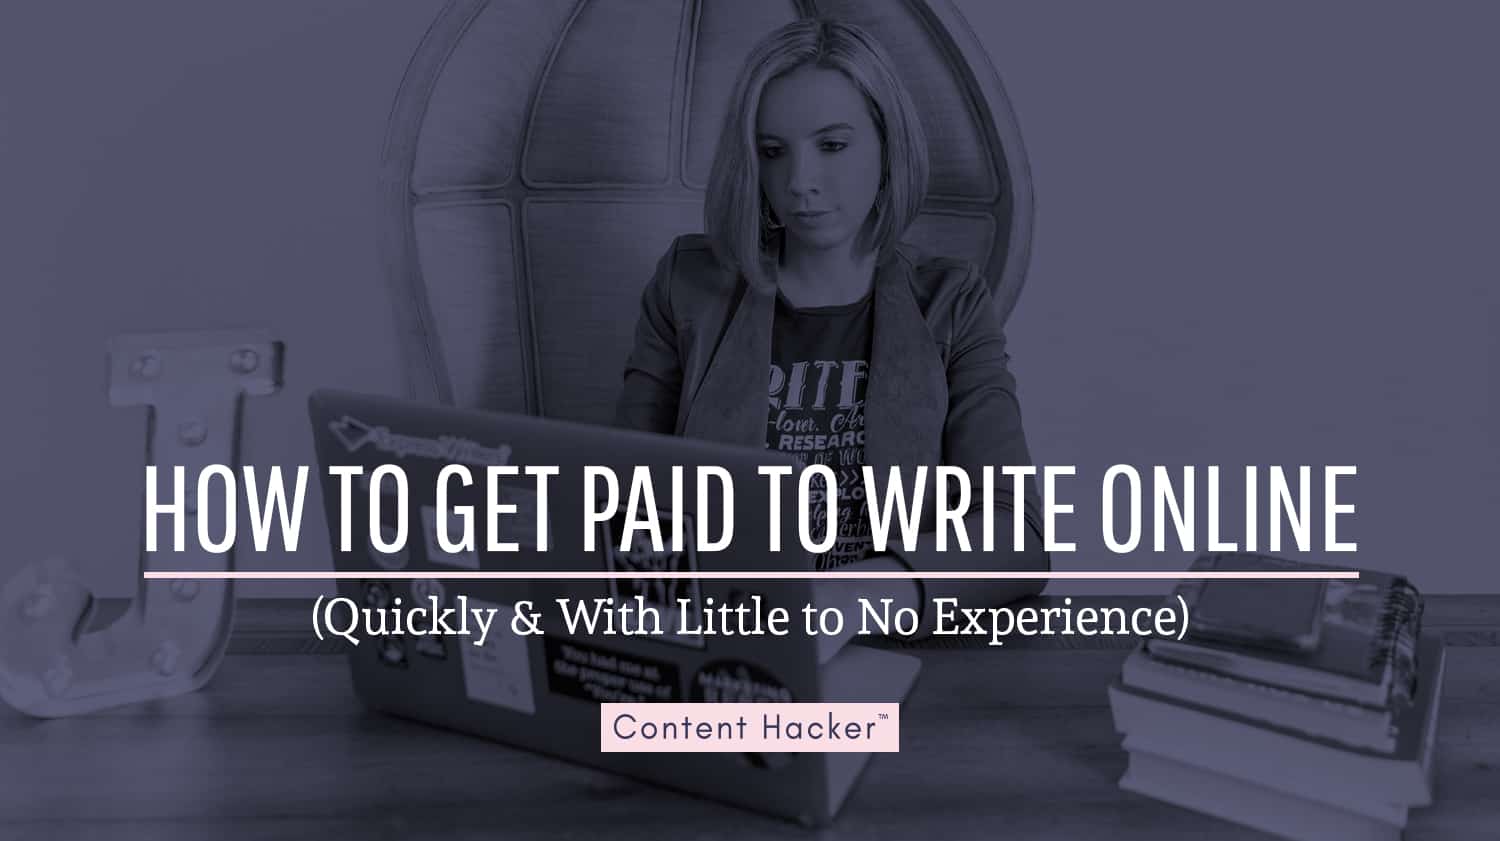 How to get paid to write